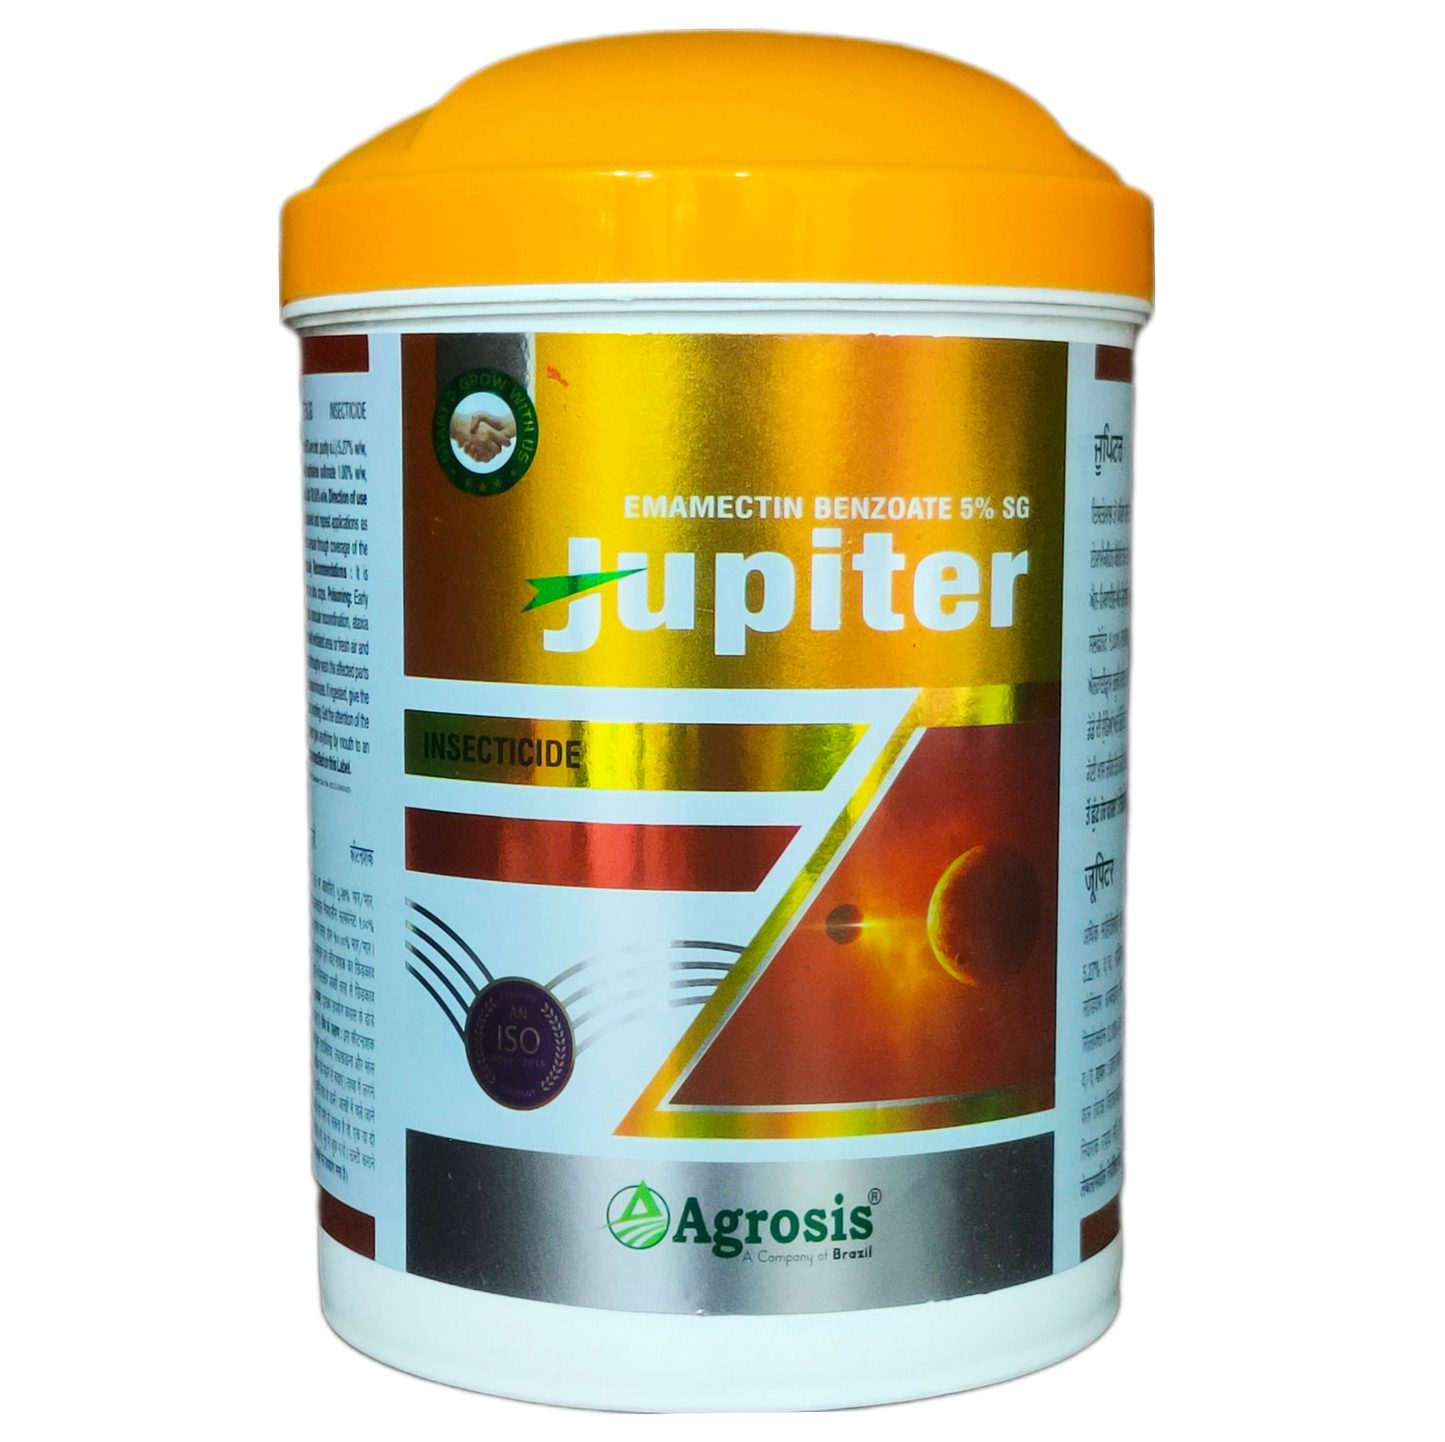 Jupiter - Emamectin Benzoate 5% SG Insecticide